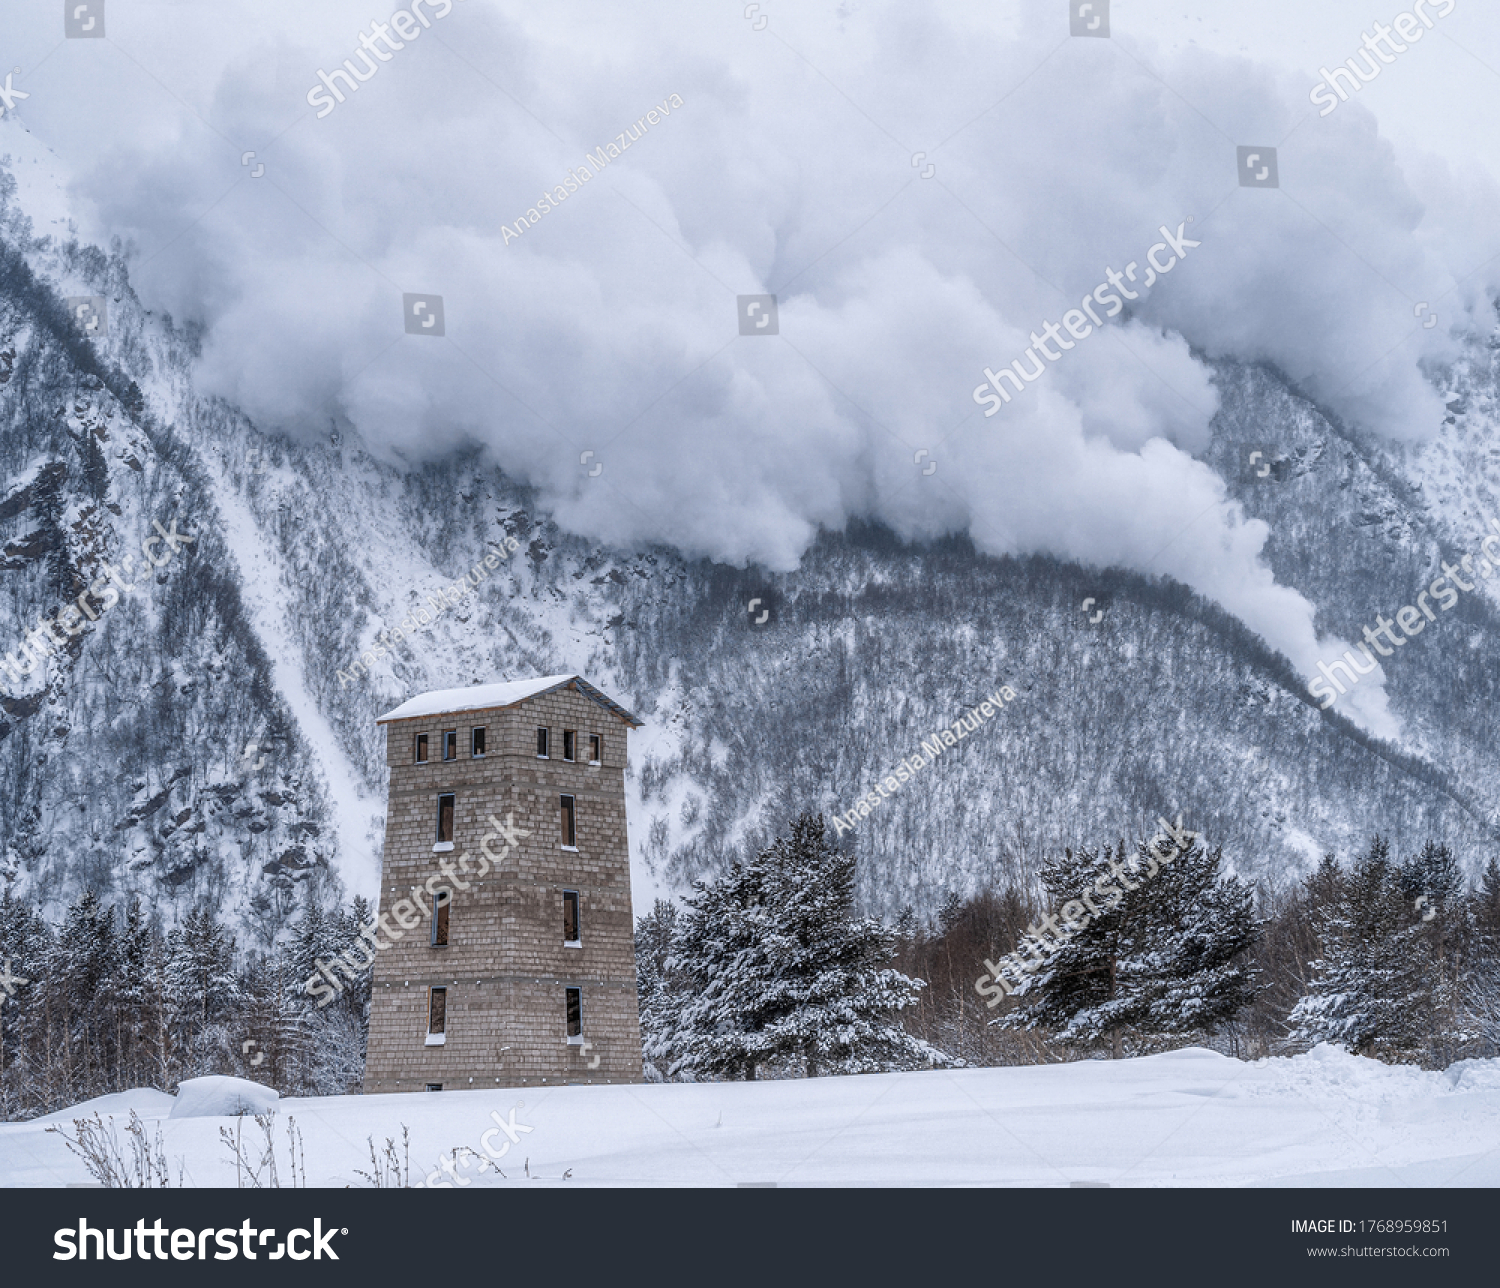 Descent of an avalanche from the mountain. House at the foot of the mountain. Winter mountain landscape. #1768959851